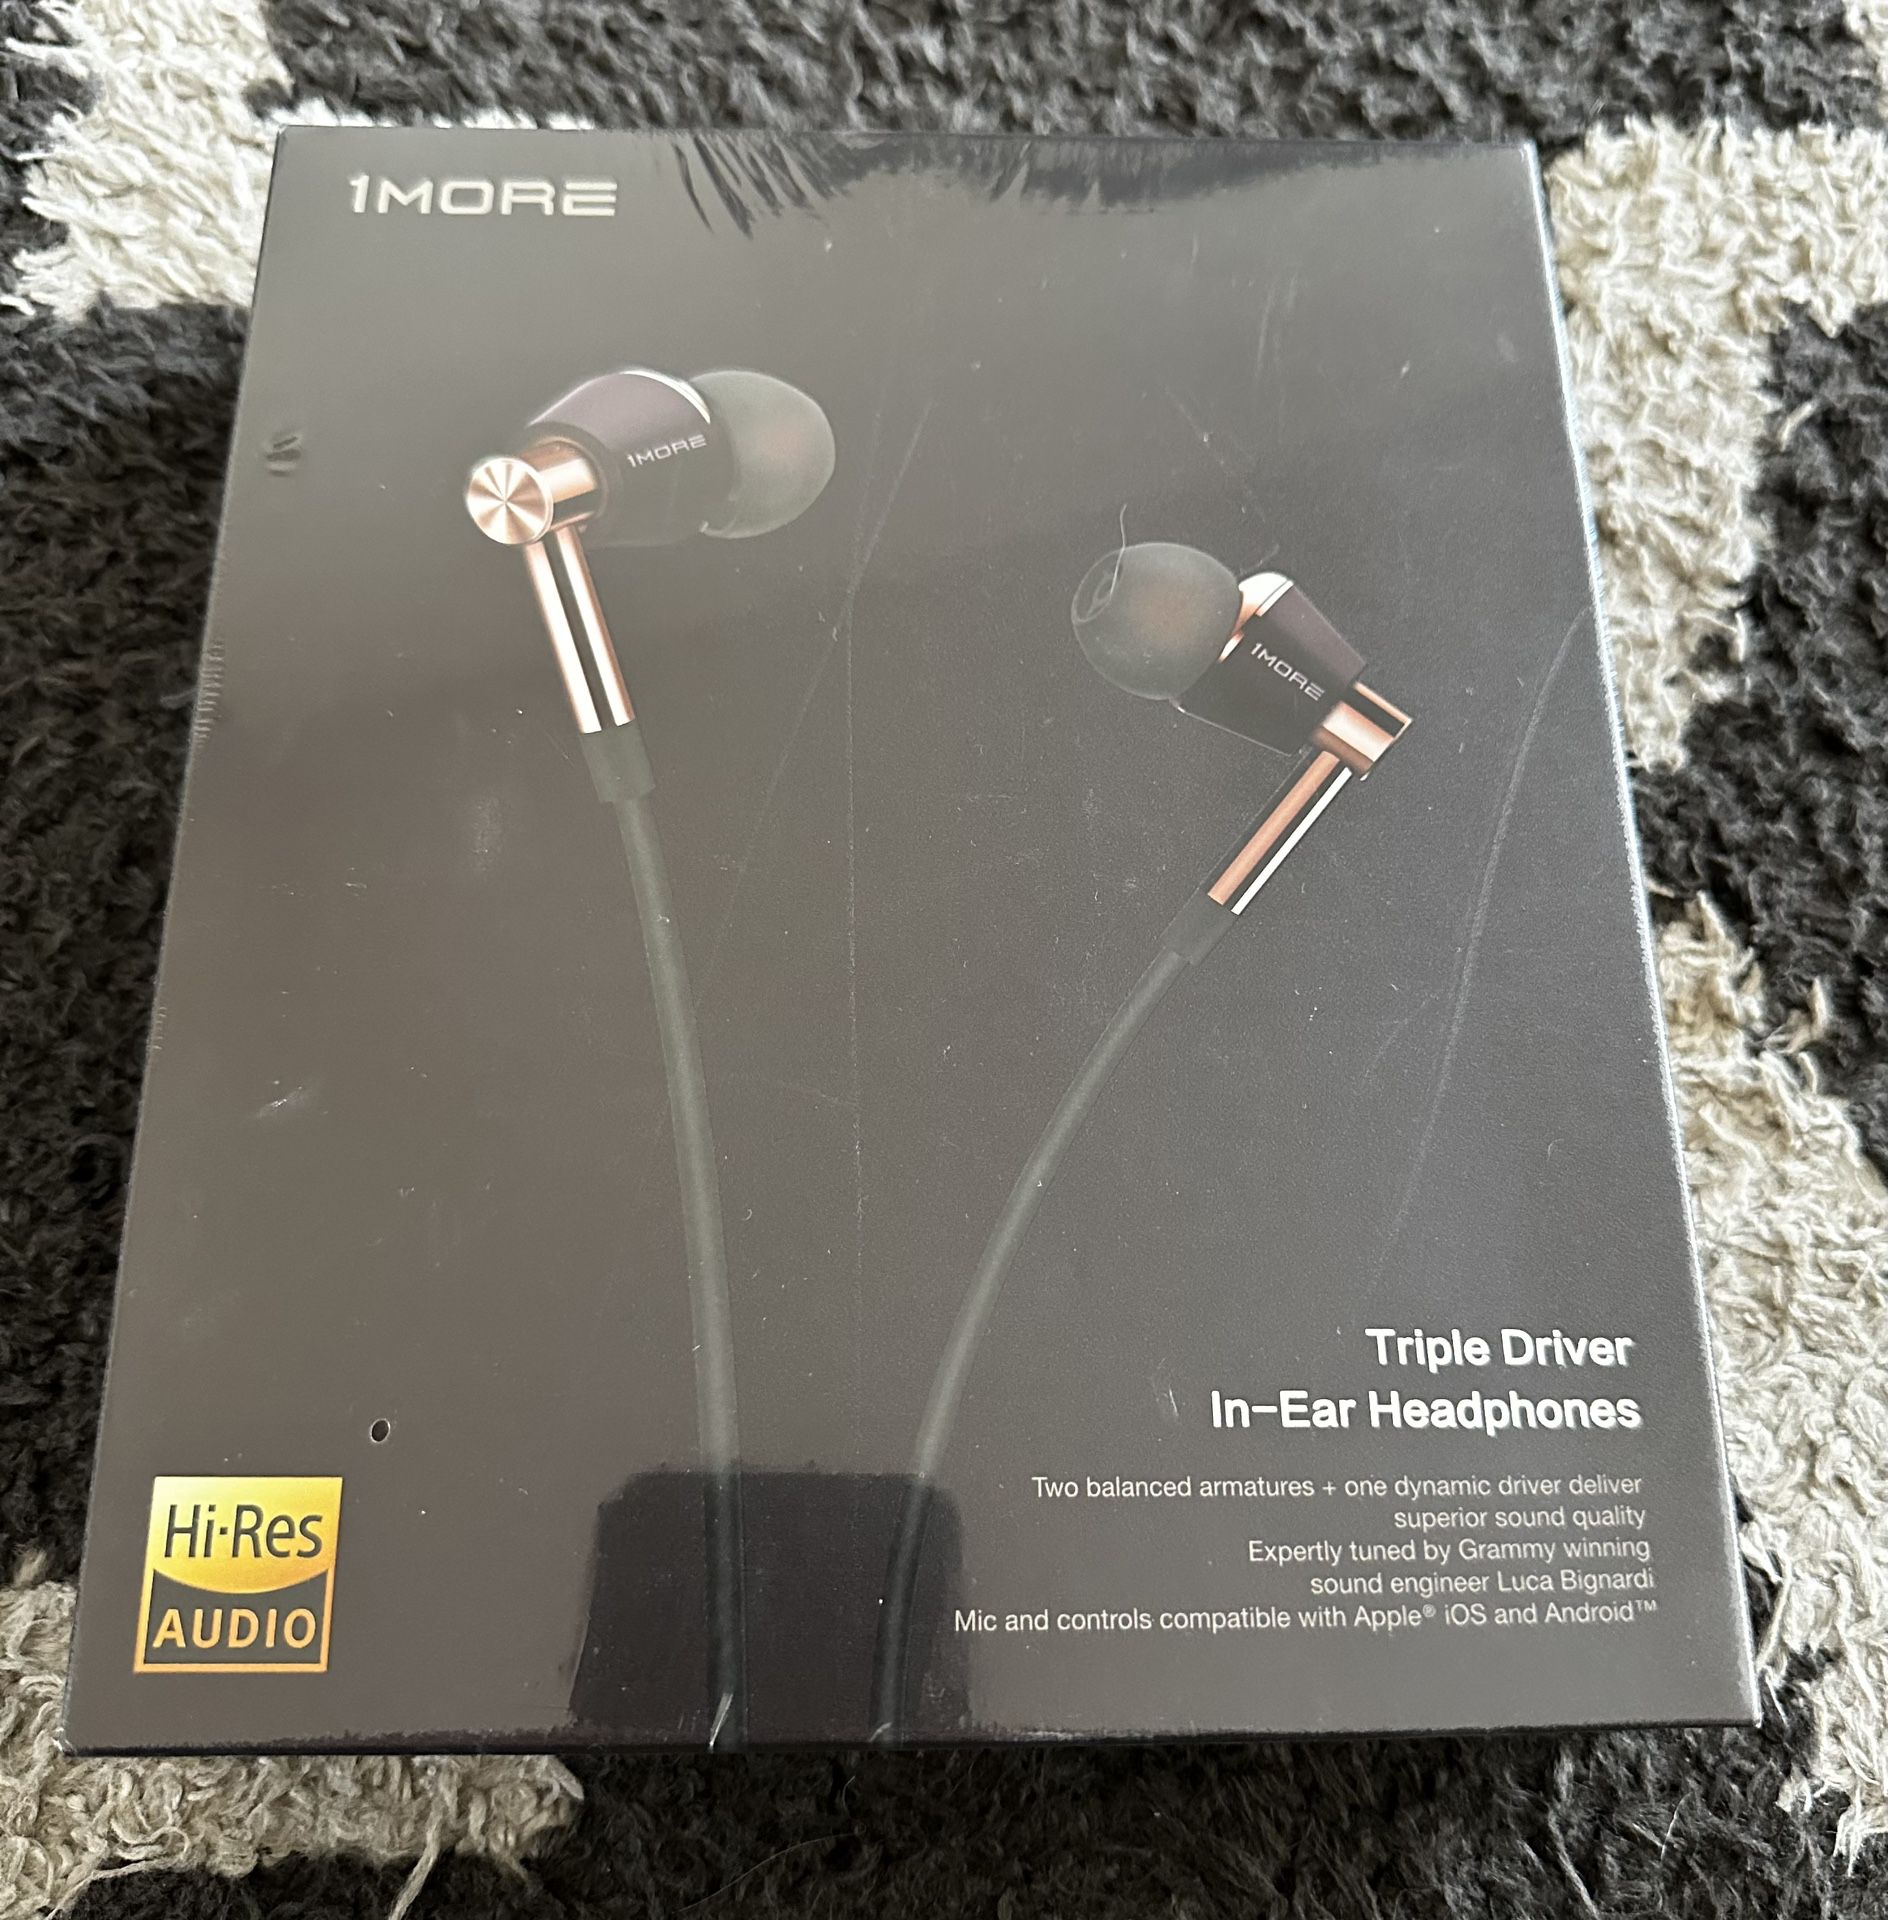 1MORE Triple Driver In-Ear Earphones Hi-Res Headphones with High Resolution, Bass Driven Sound